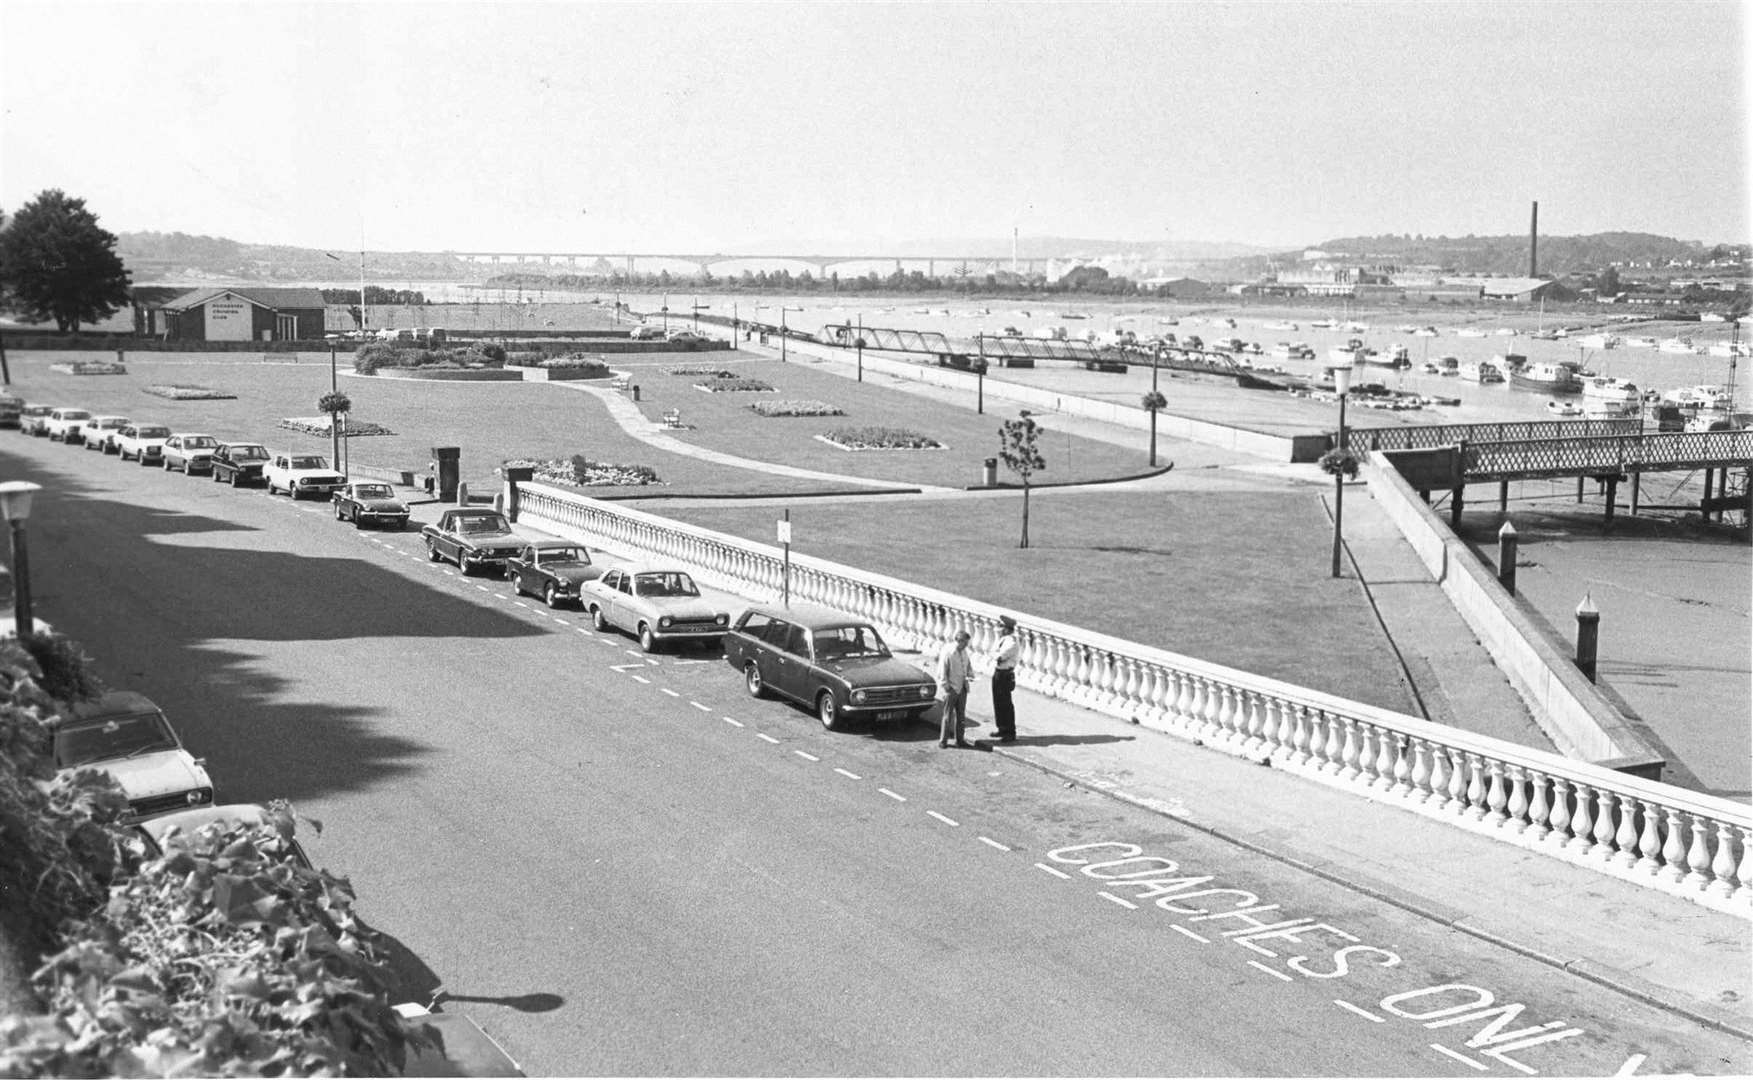 The Esplanade, Rochester, in 1980 - perhaps Hazell Dean had a point